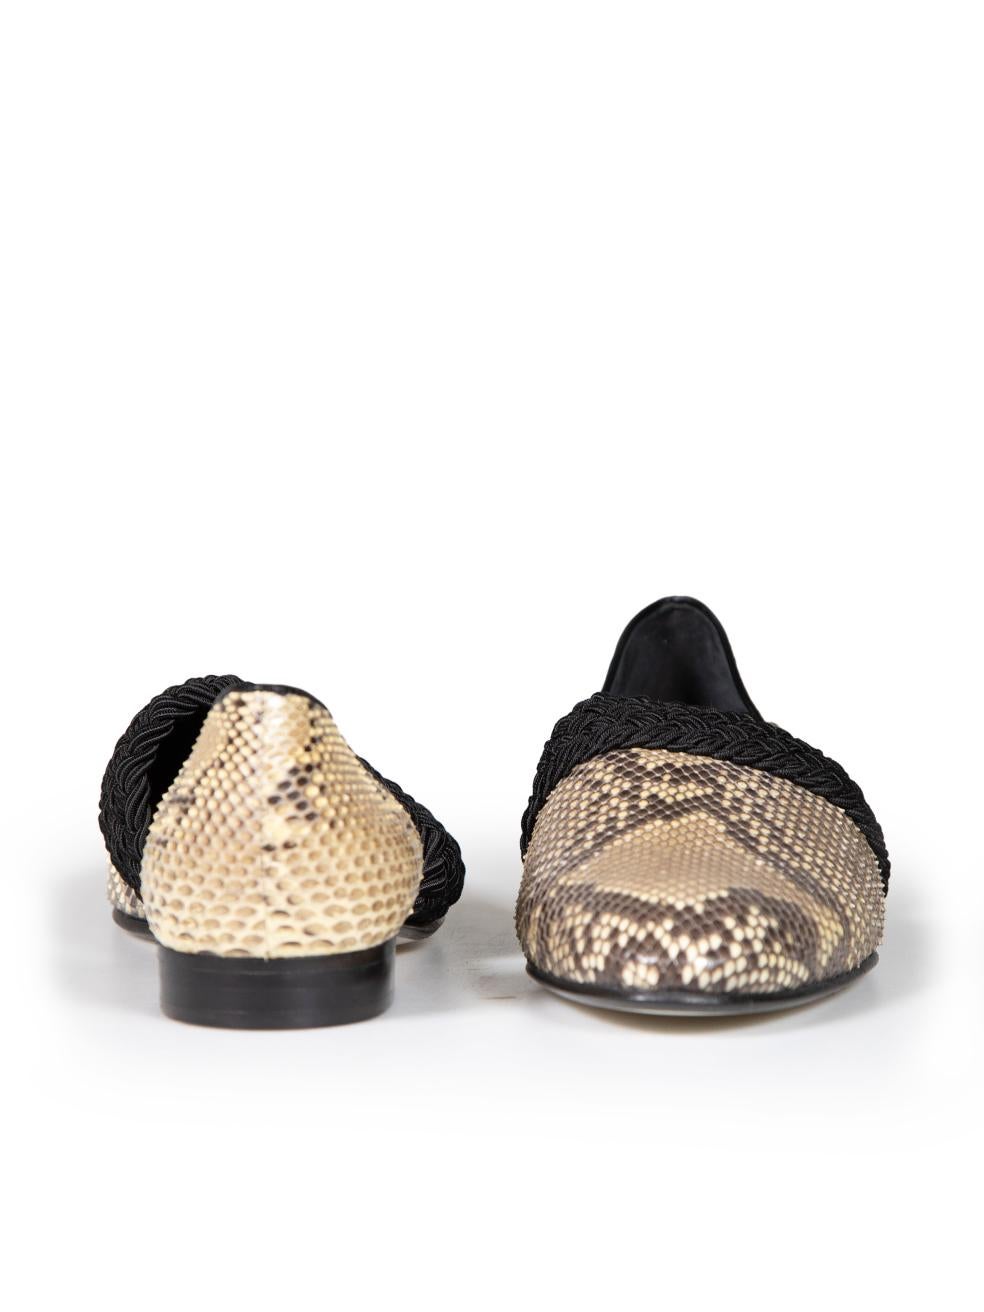 Loewe Brown Python Leather Woven Low Heels Size IT 37 In Good Condition For Sale In London, GB